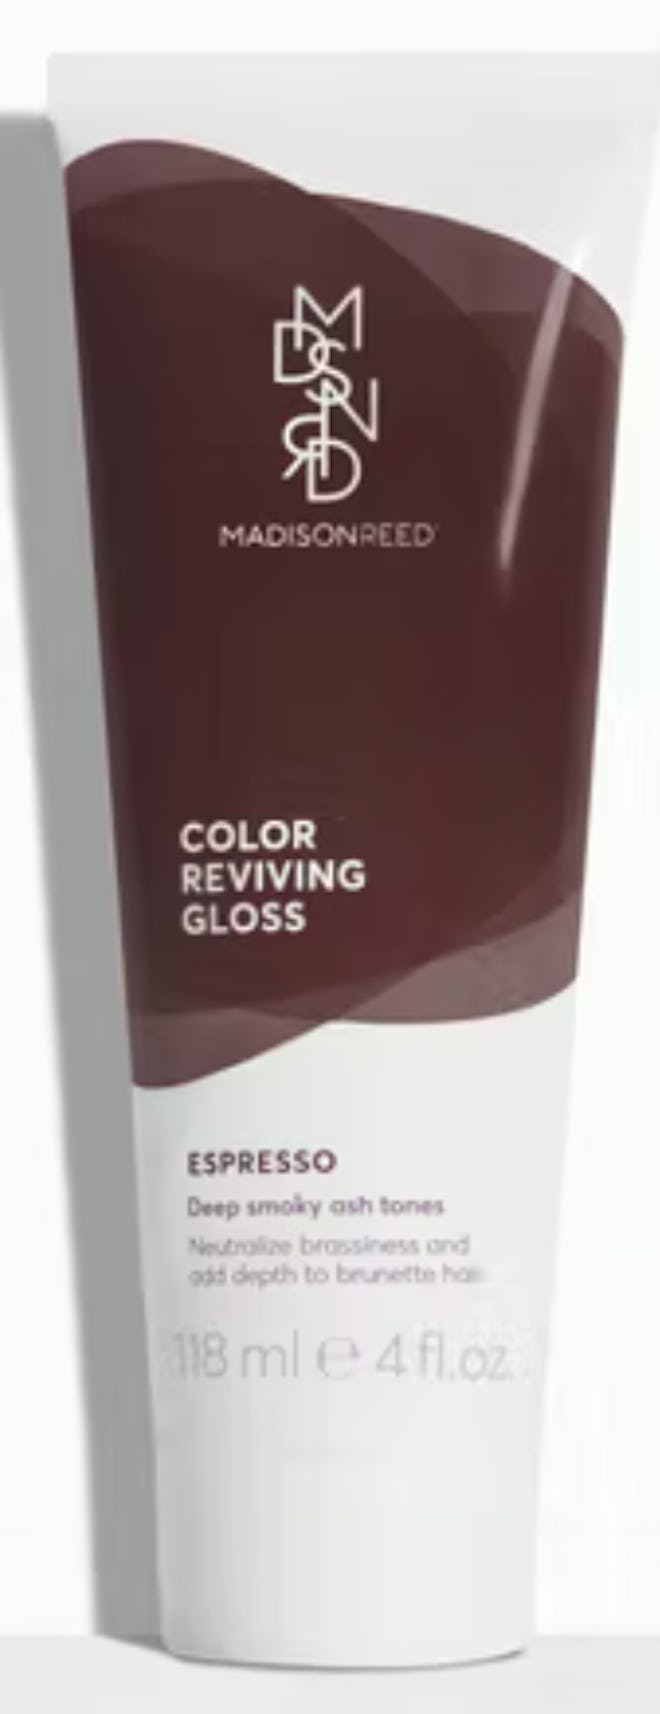 Madison Reed Espresso Gloss for brown hair